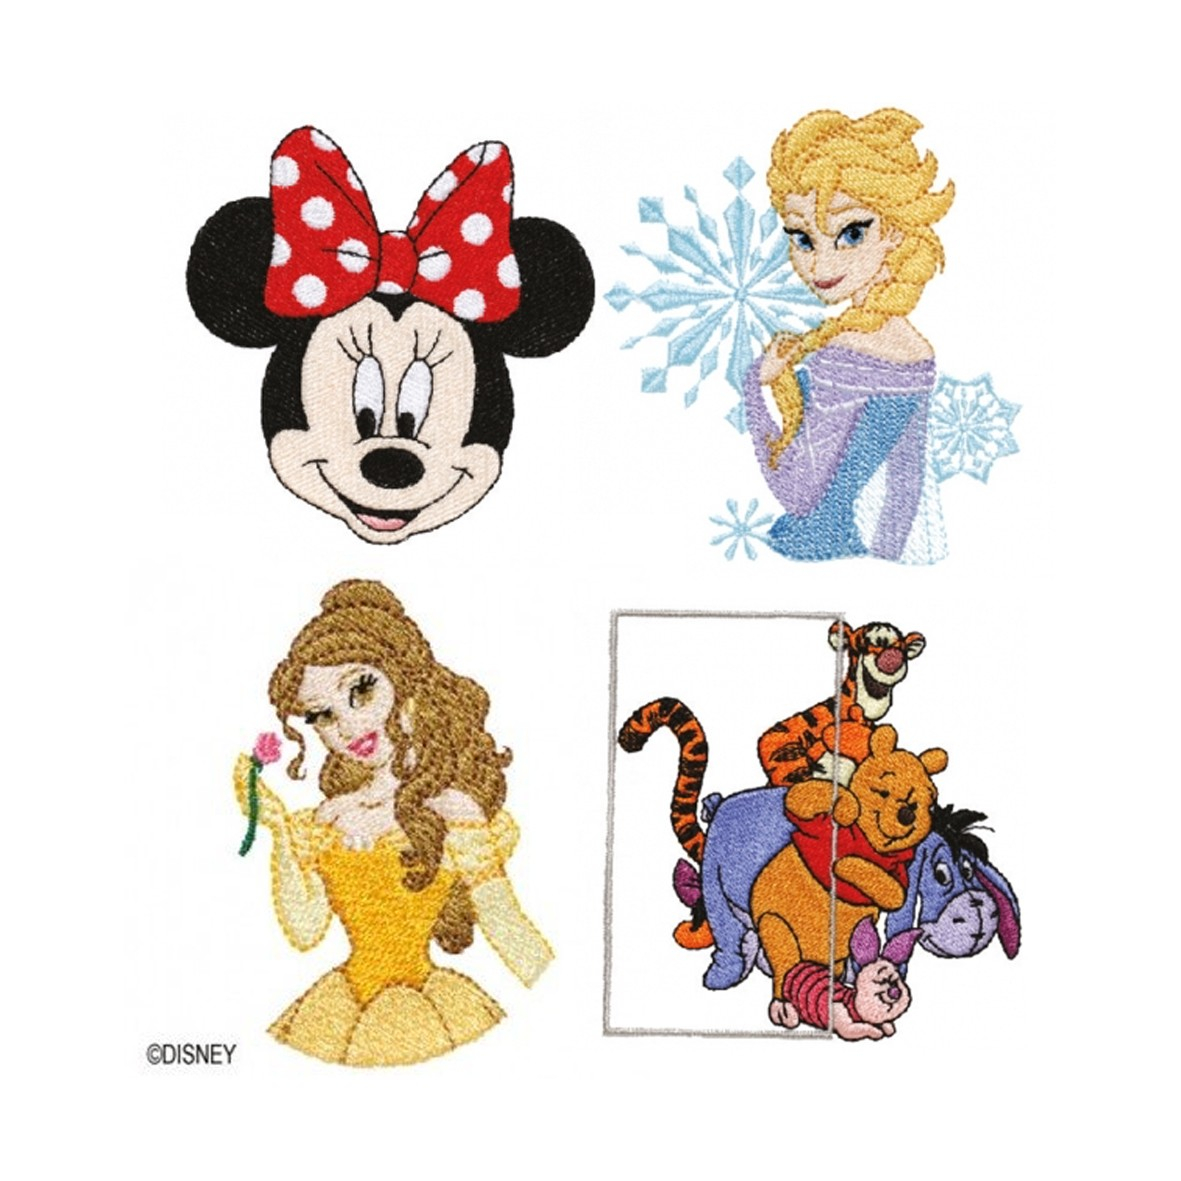 Disney Embroidery Patterns Brother Innov Is M280d Frank Nutt Sewing Machines Ltd Buy Online